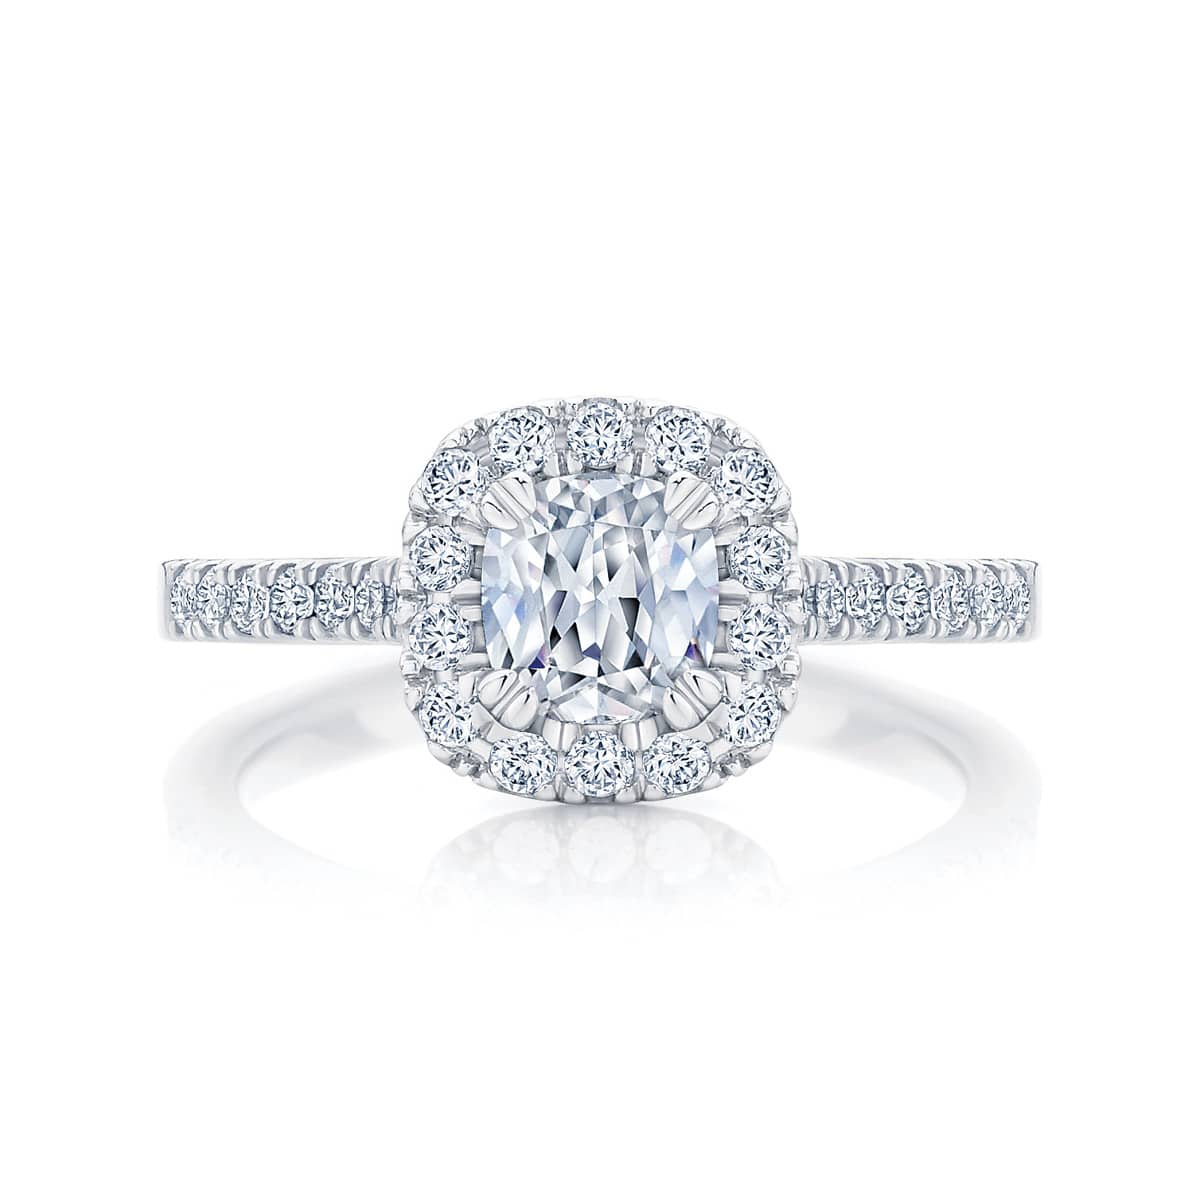 Klos Diamond Center - Oooo...simple yet elegant describes this cushion  shaped diamond engagement 💍 ring...1.31 center, elongated cushion diamond  with custom made side diamonds, 1.68 total weight in diamonds...call  256-837-4700 to set